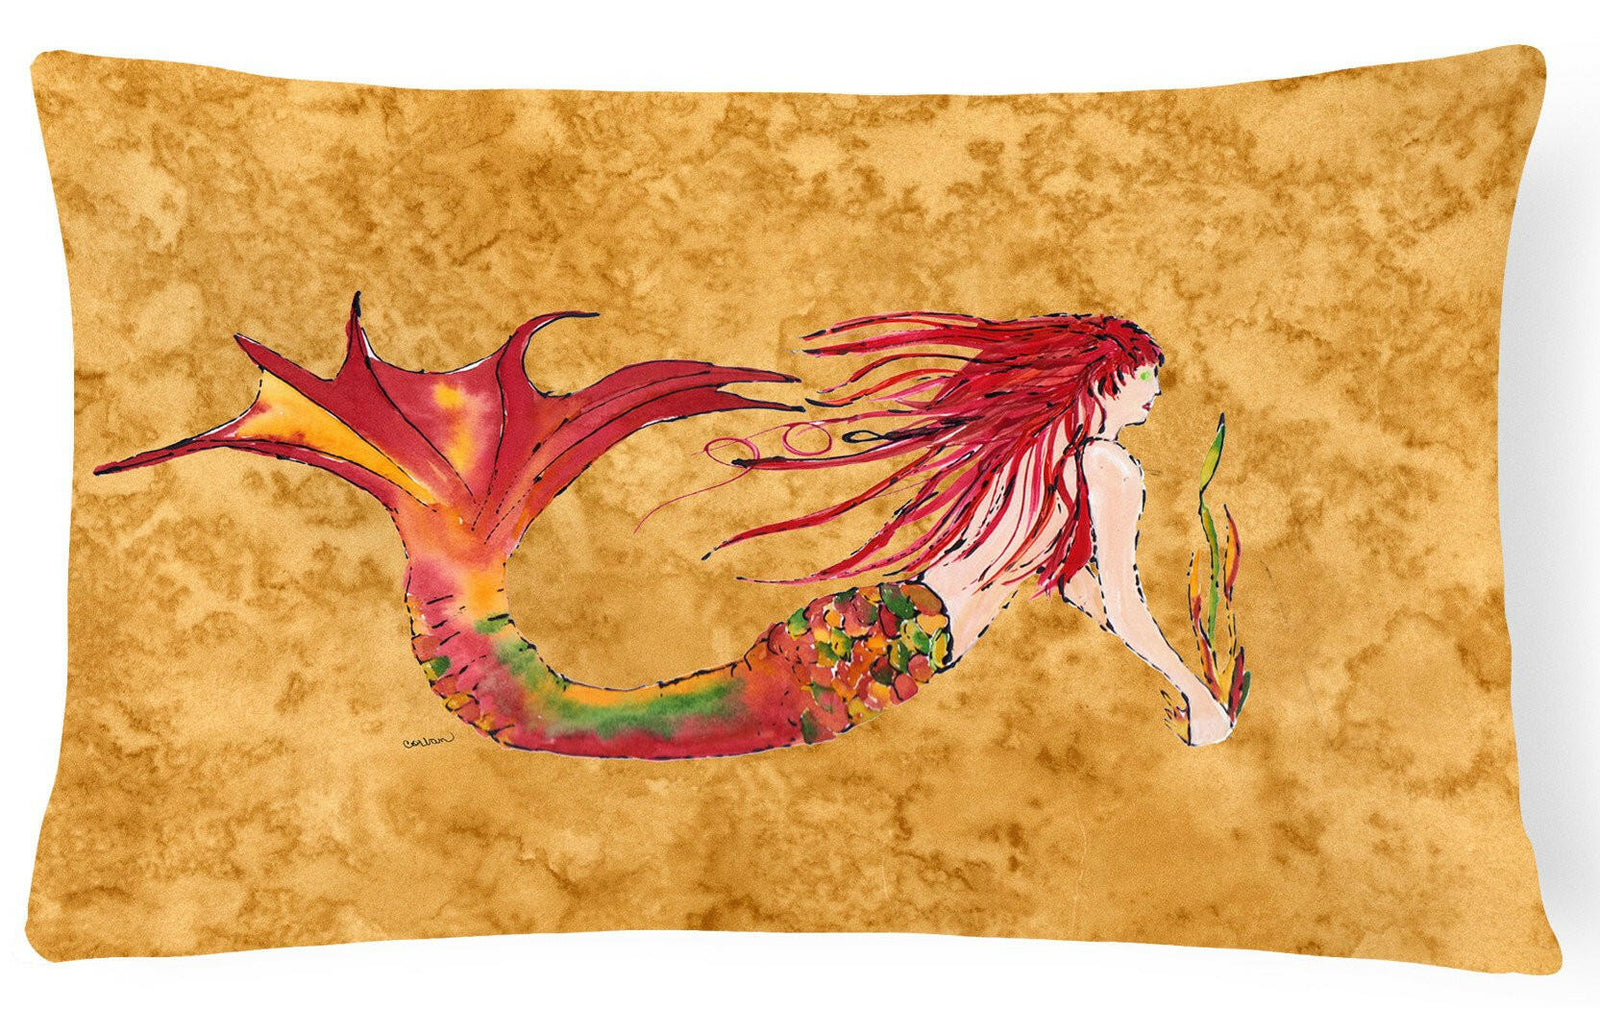 Ginger Red Headed Mermaid on Gold Canvas Fabric Decorative Pillow 8727PW1216 by Caroline's Treasures